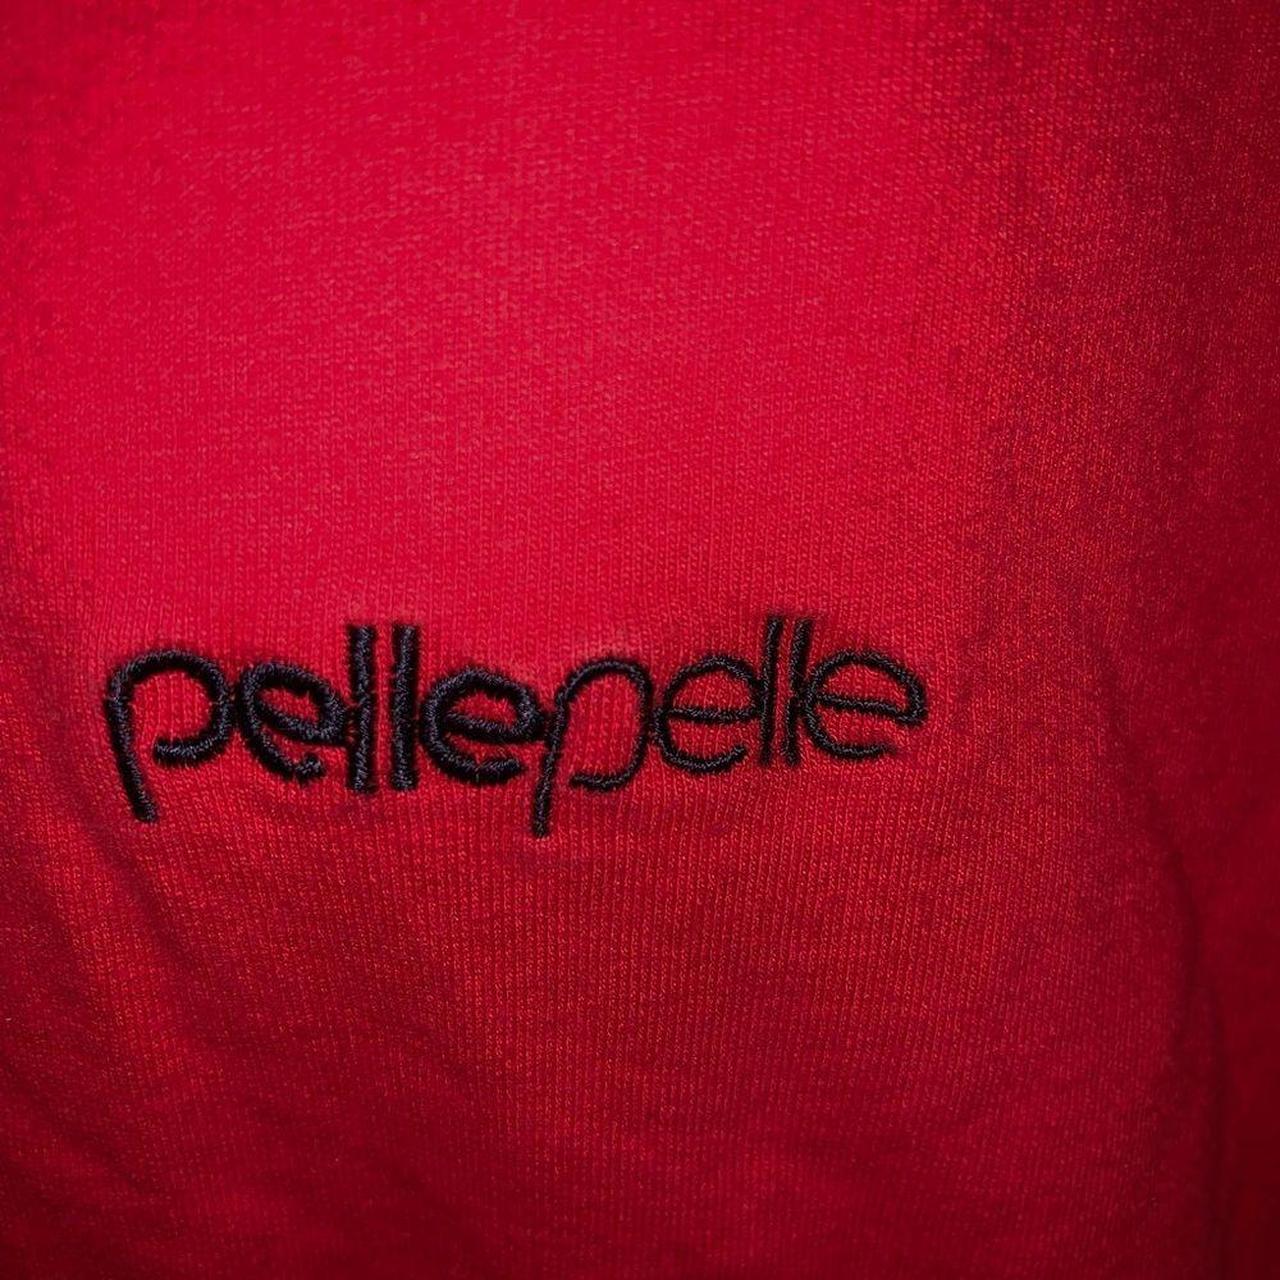 Product Image 4 - pellepelle Polo Shirt
Size 4XL
1978 
Marc